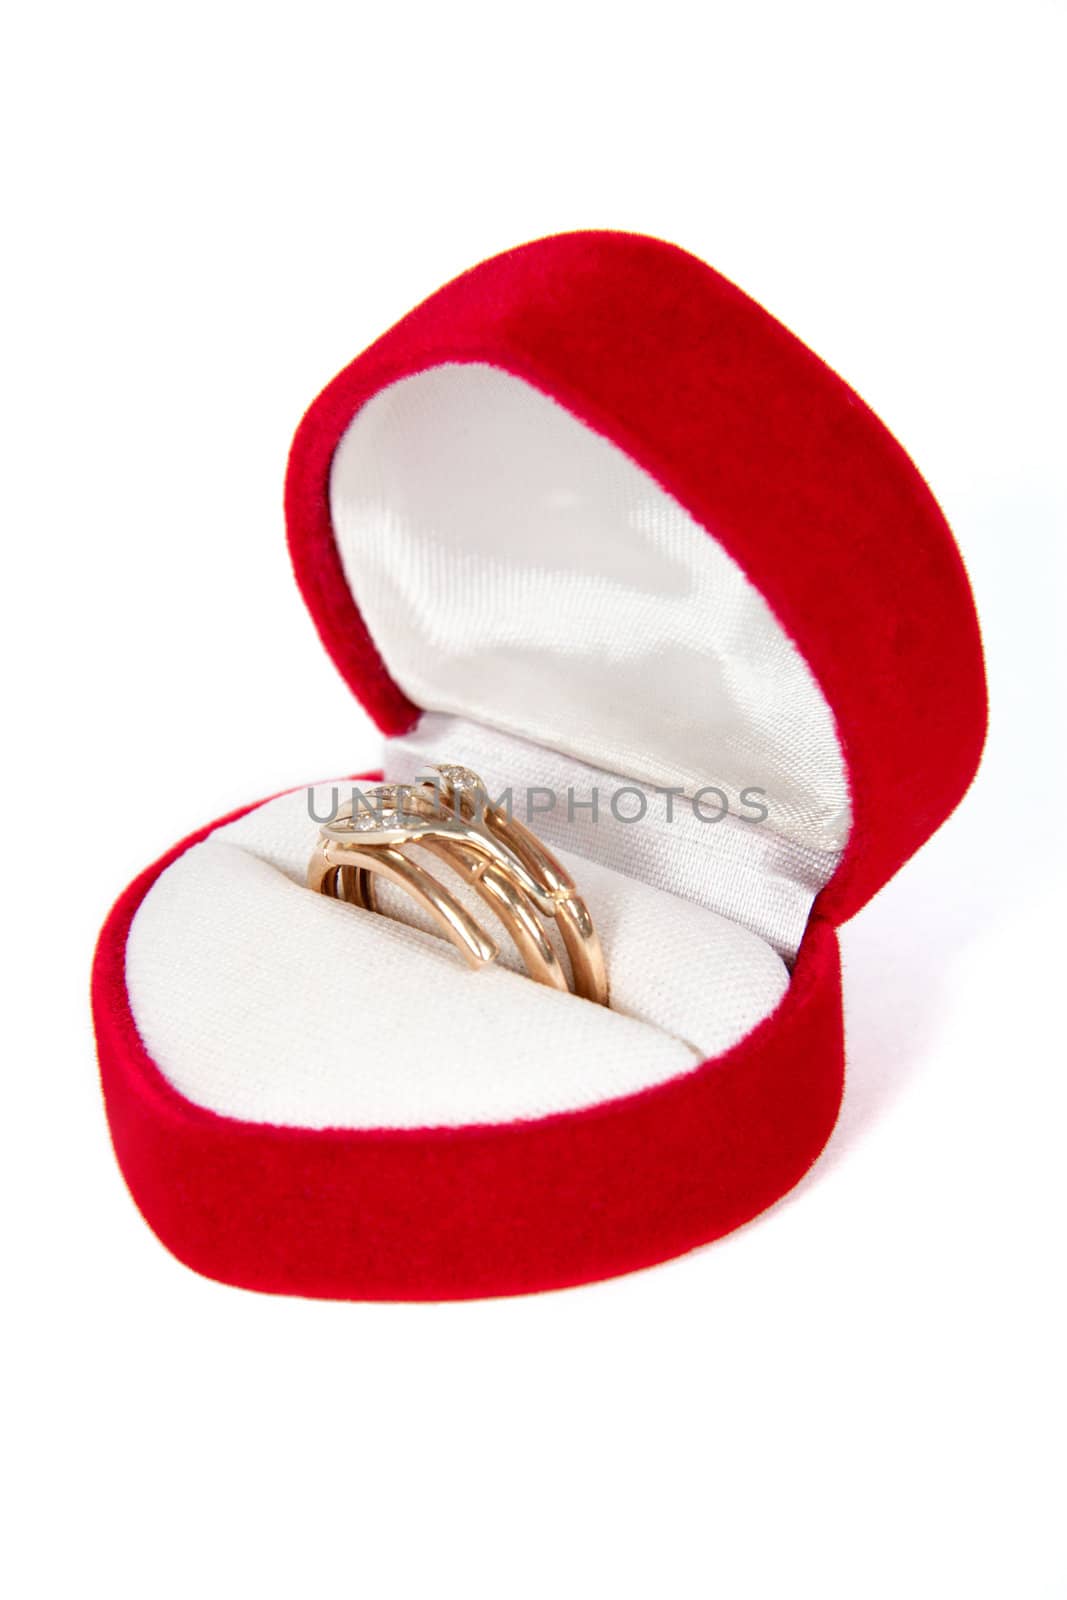 The jewelry image in a box, in the form of the heart, isolated, on a white background